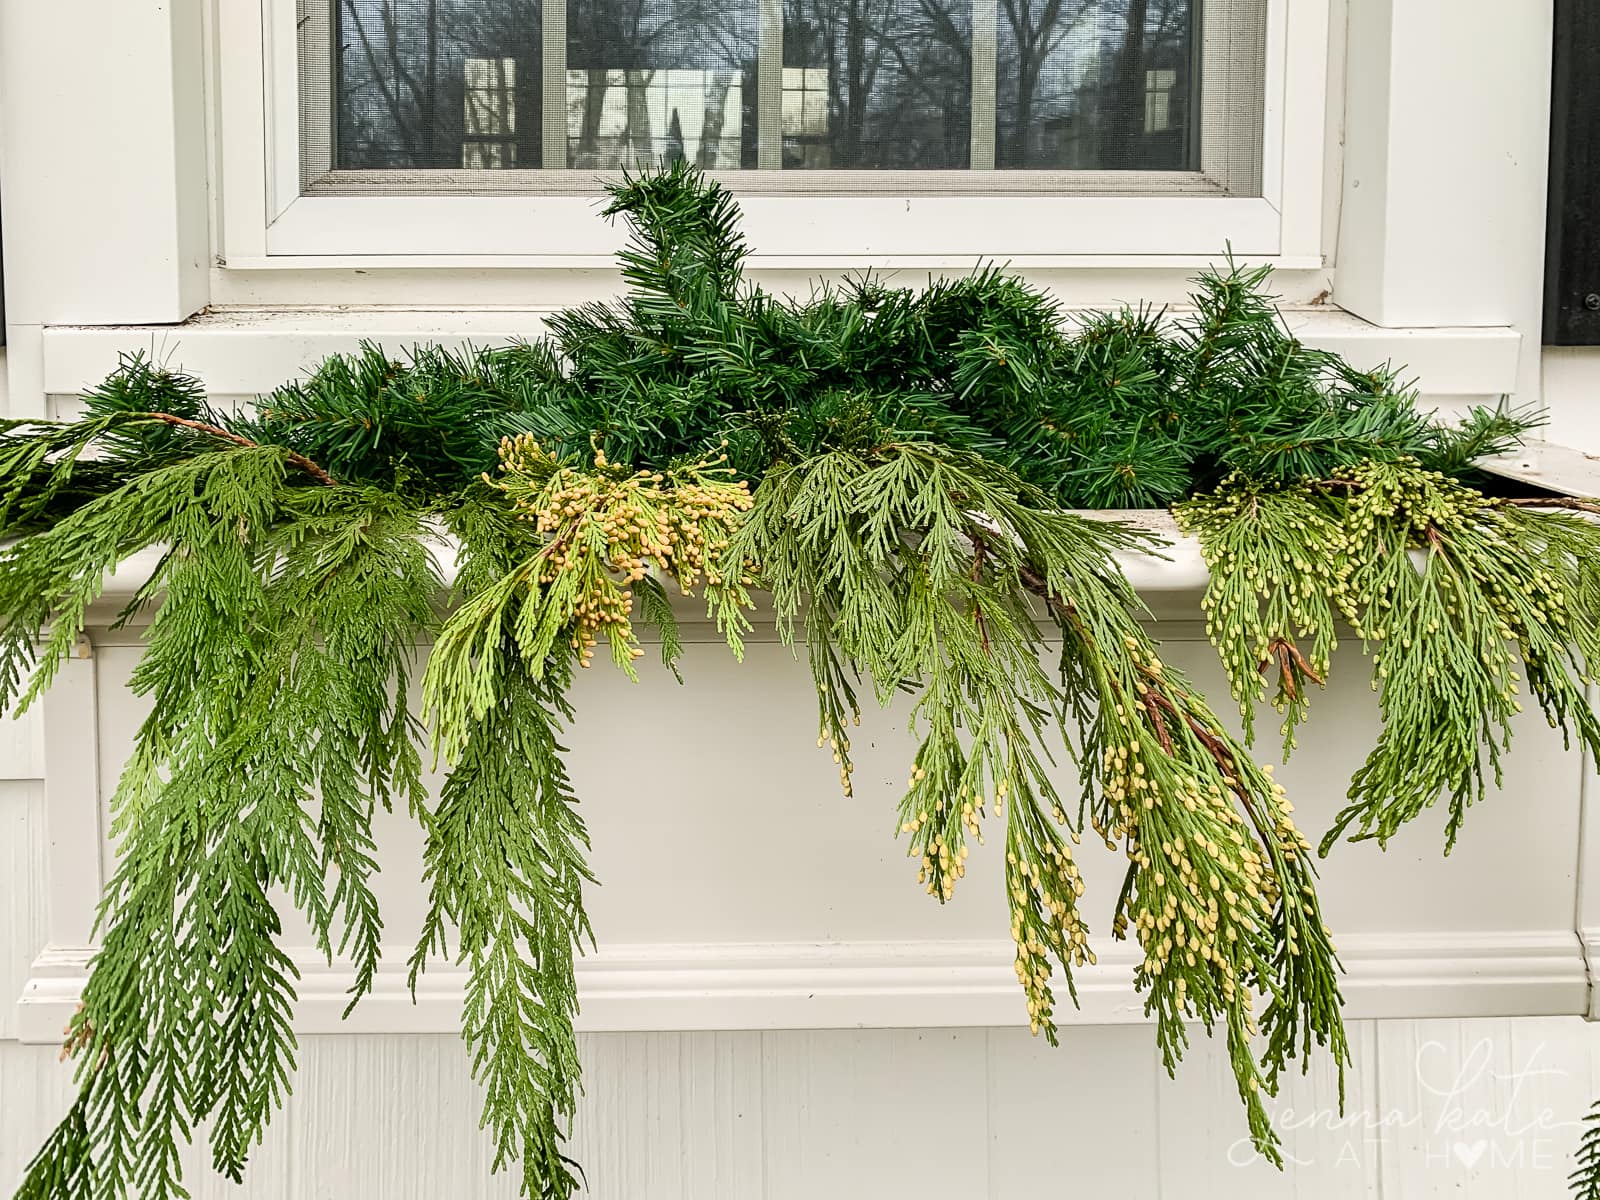 Cedar branches draping over the front of the window box